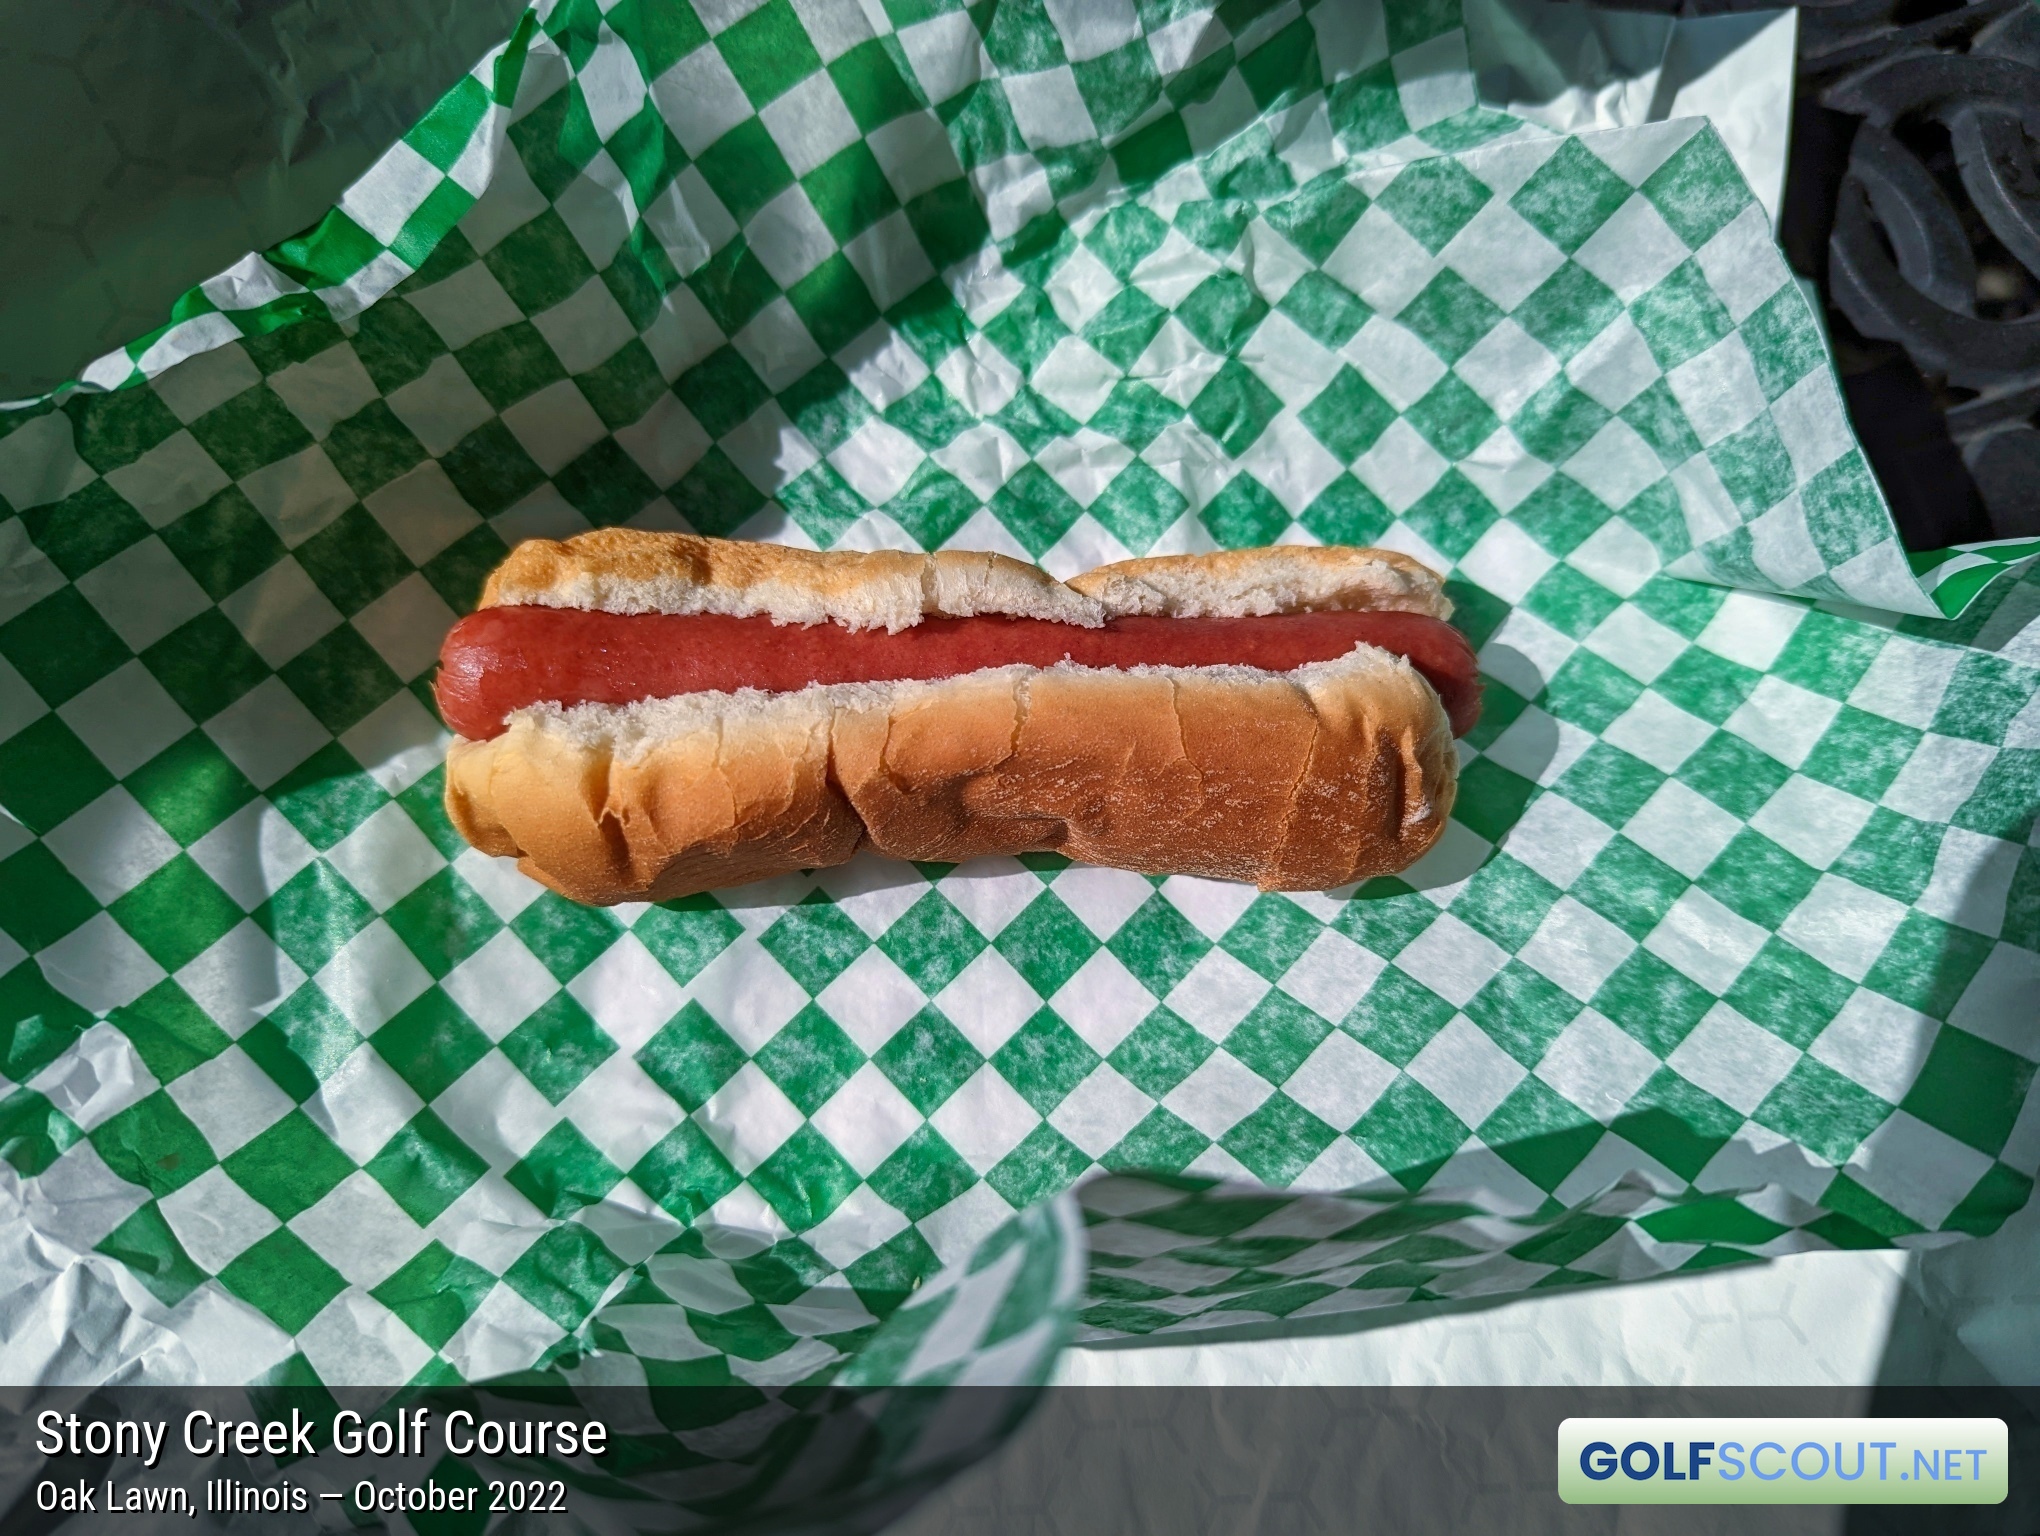 Photo of the food and dining at Stony Creek Golf Course in Oak Lawn, Illinois. Photo of the hot dog at Stony Creek Golf Course in Oak Lawn, Illinois.